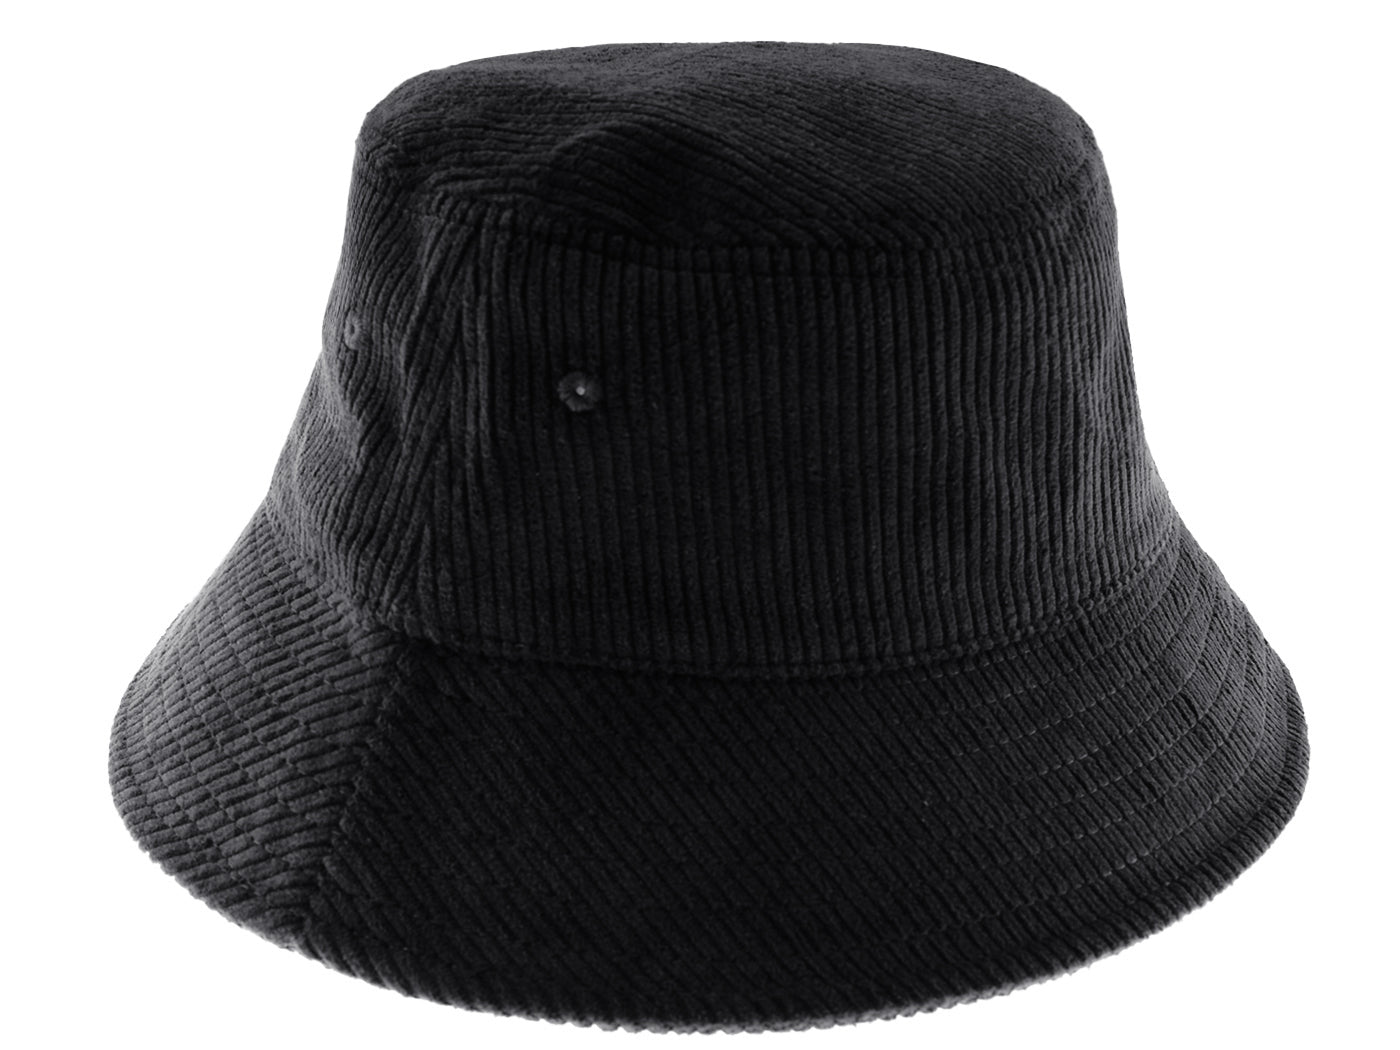 Anna-Kaci Corduroy Bucket Hat Lightweight Casual Solid Color unisex Cotton Fishing Hat, One Size / Black